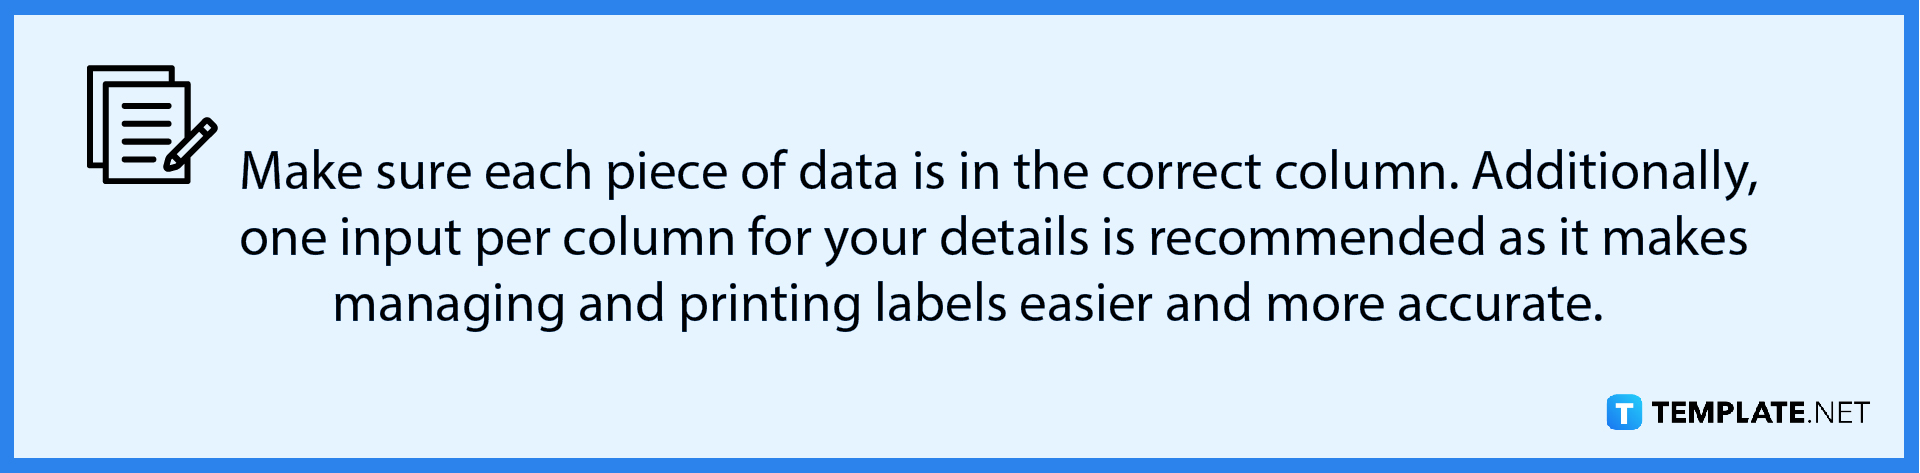 how-to-print-labels-from-microsoft-excel-note-1